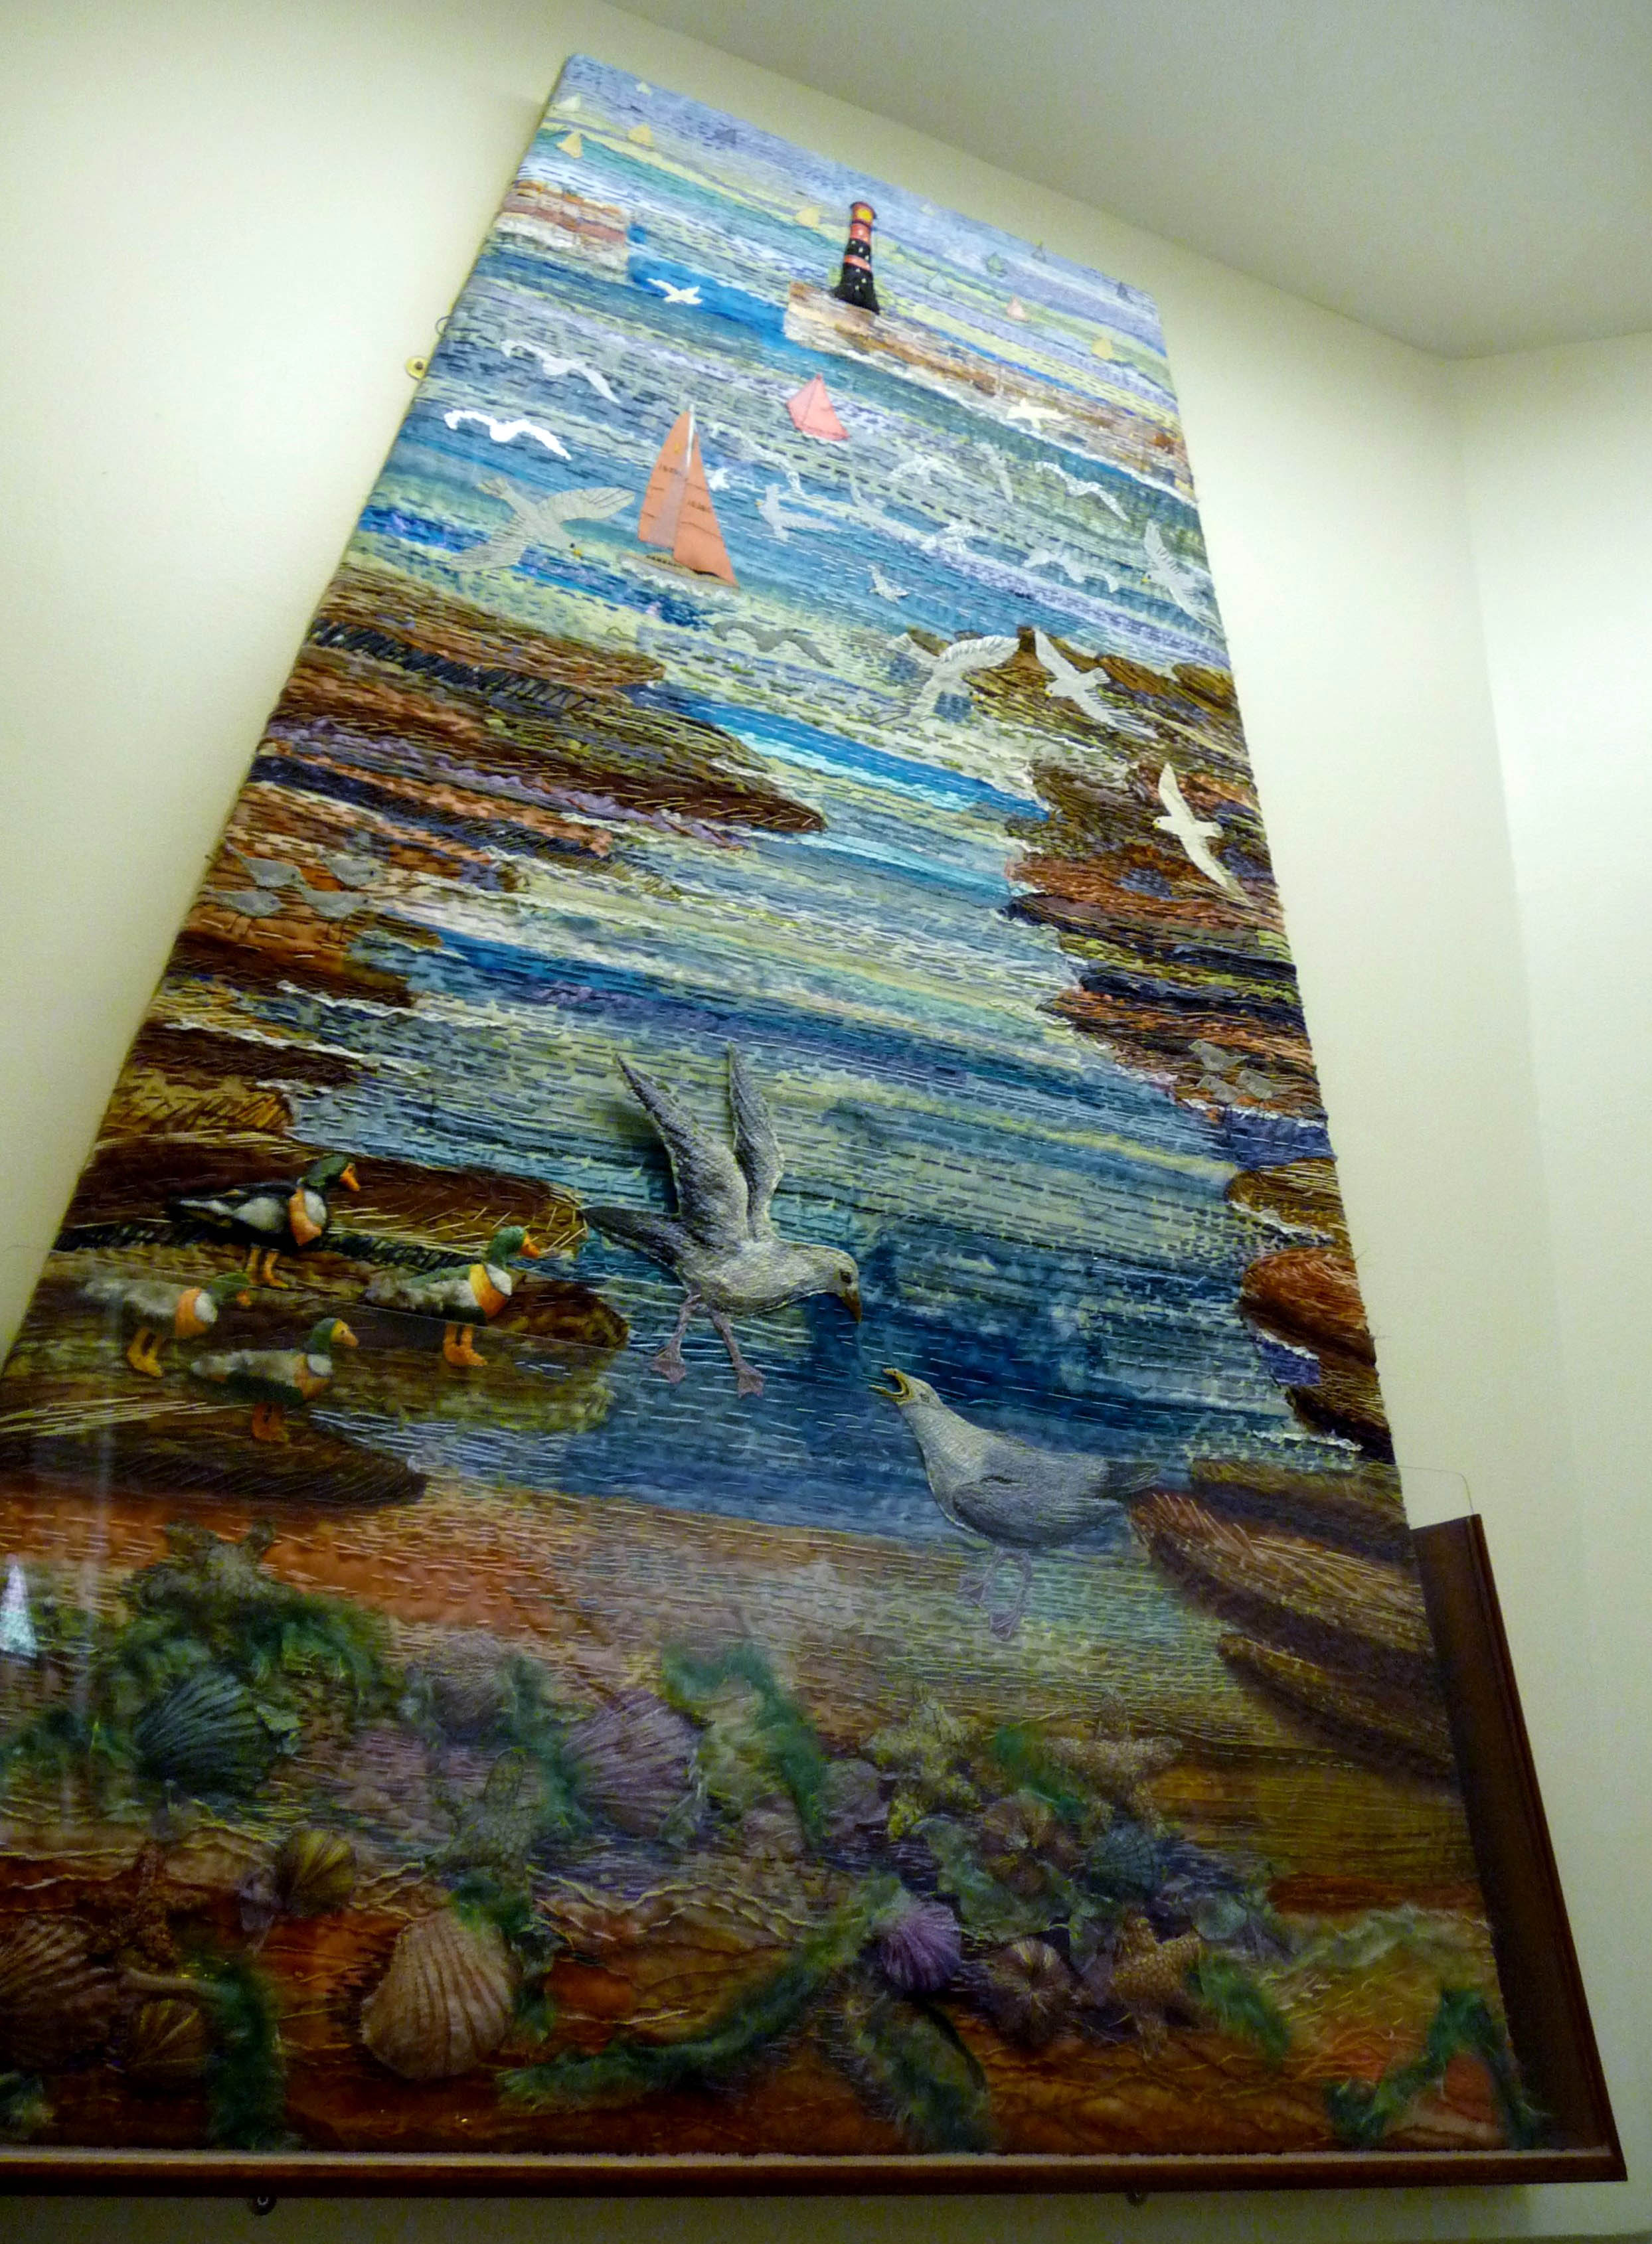 "The Estuary", the lower panel of the WATERFALL PROJECT in Liverpool Women's Hospital